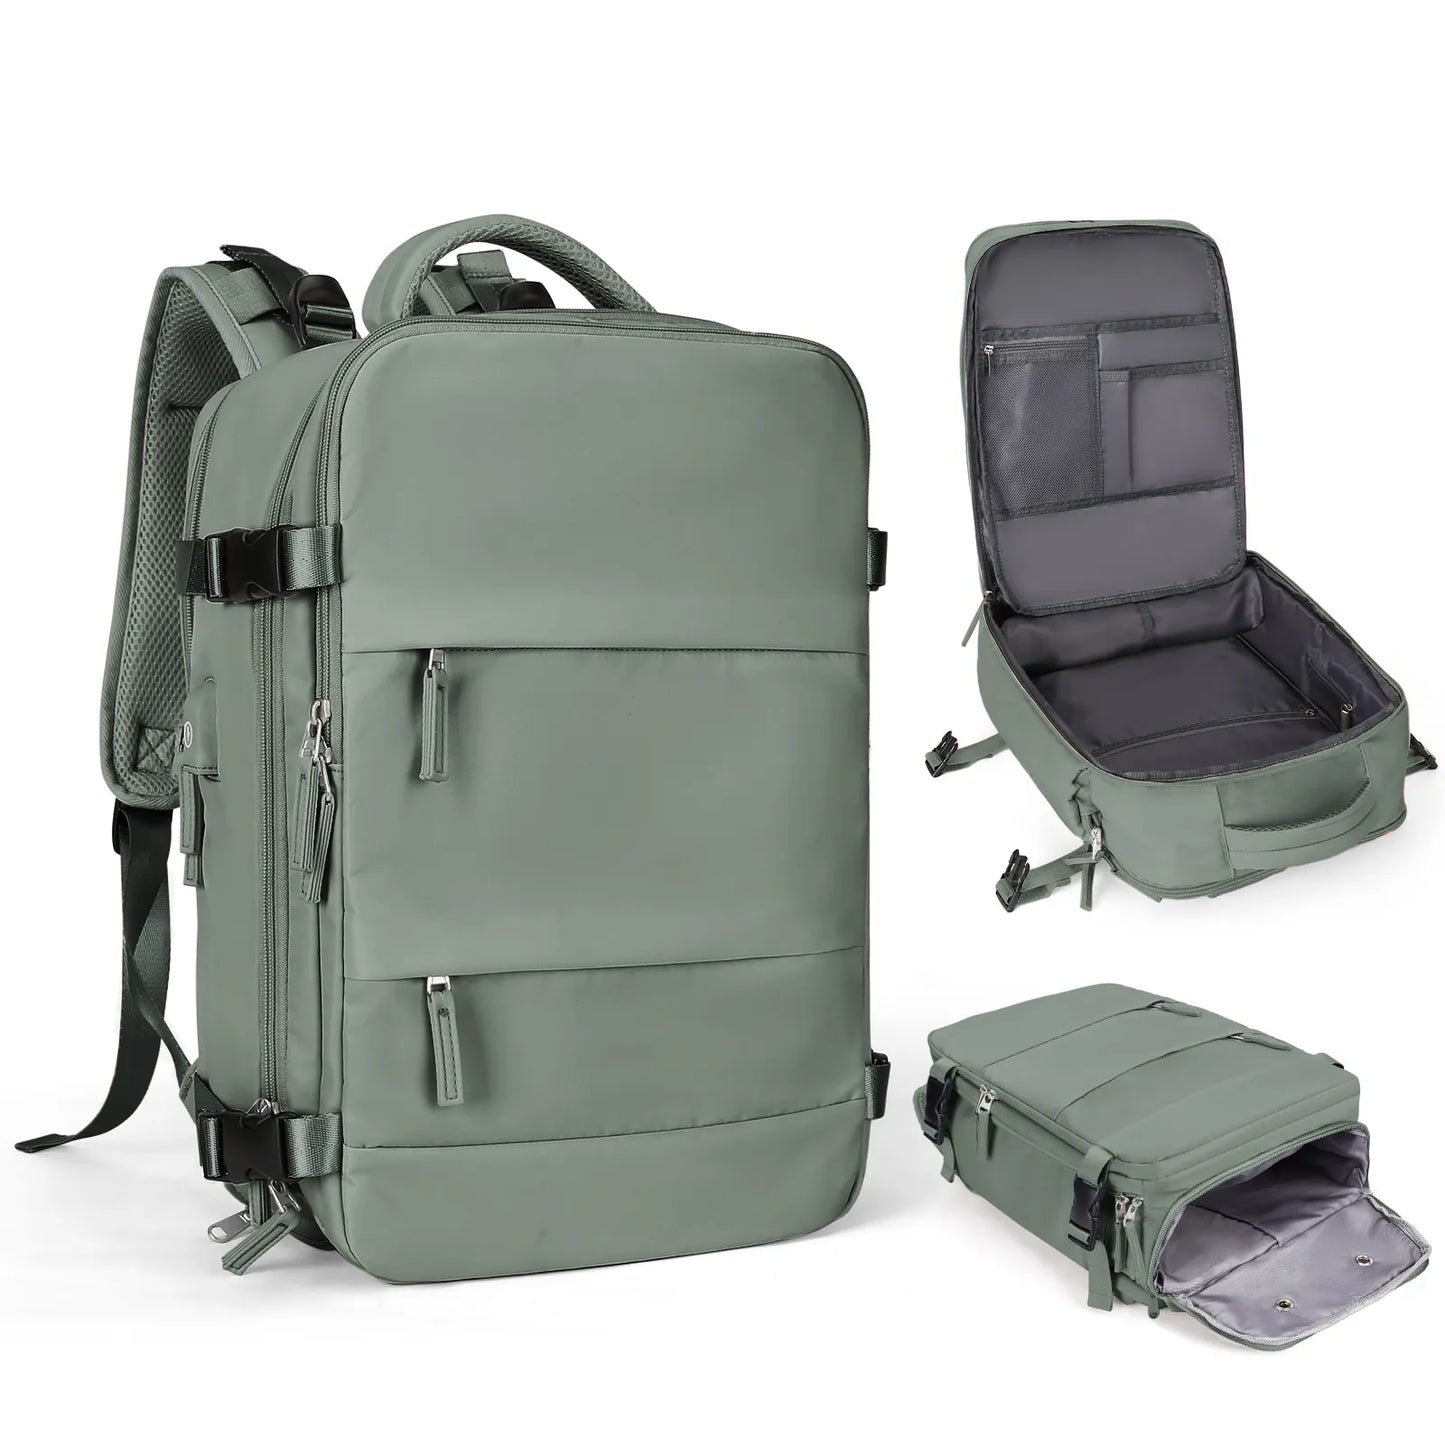 olive/army green travel backpack personal item with wet dry pocket laptop sleeve usb charger and shoe sleeve